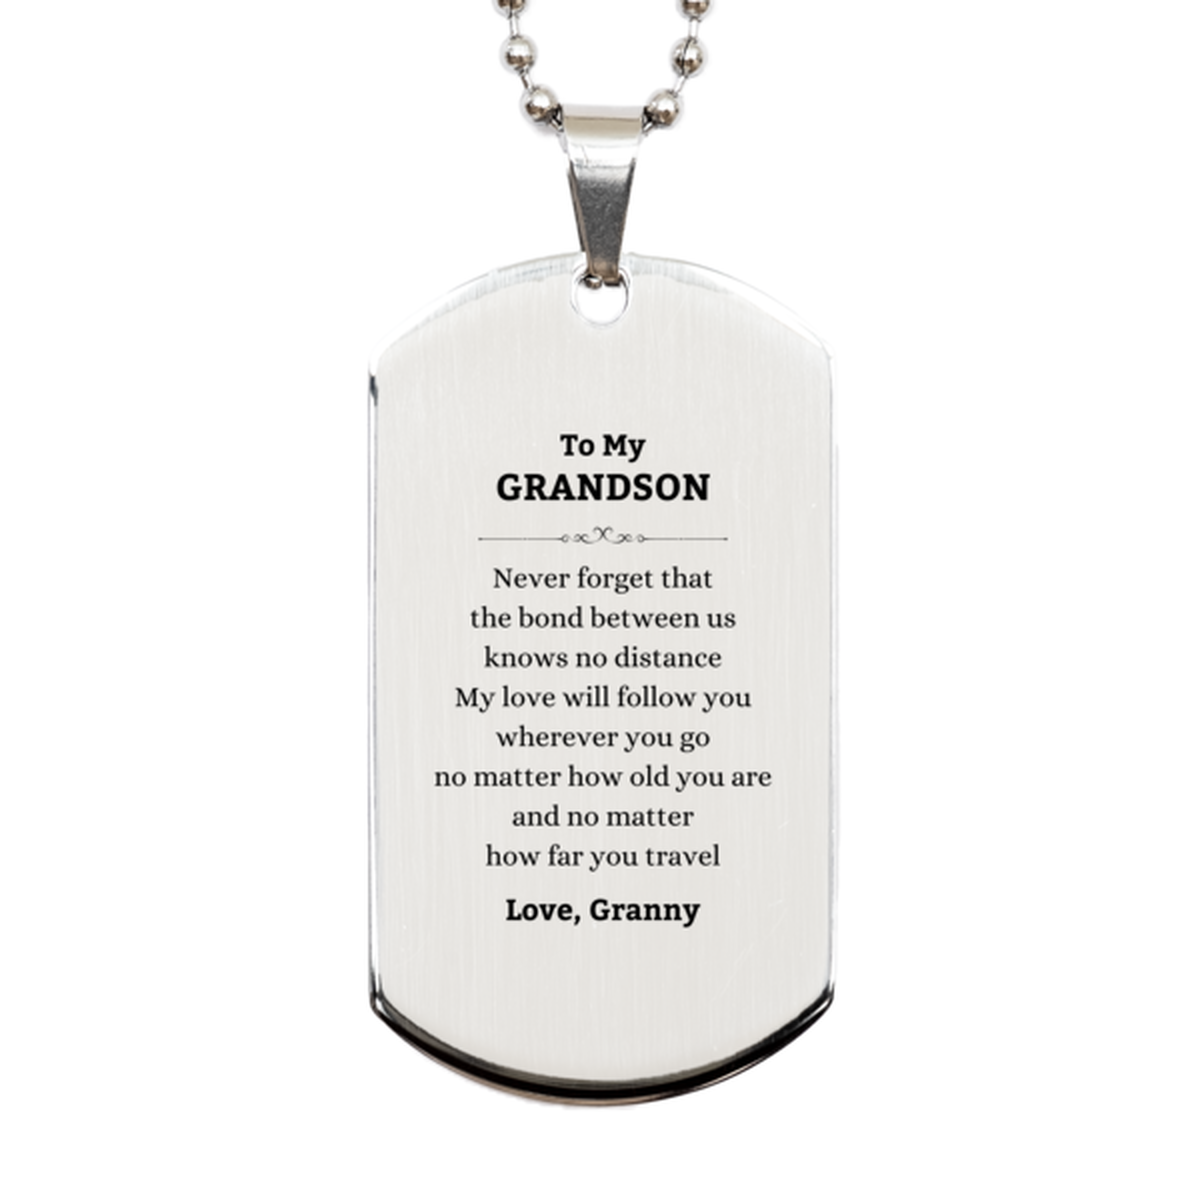 Grandson Birthday Gifts from Granny, Adjustable Silver Dog Tag for Grandson Christmas Graduation Unique Gifts Grandson Never forget that the bond between us knows no distance. Love, Granny